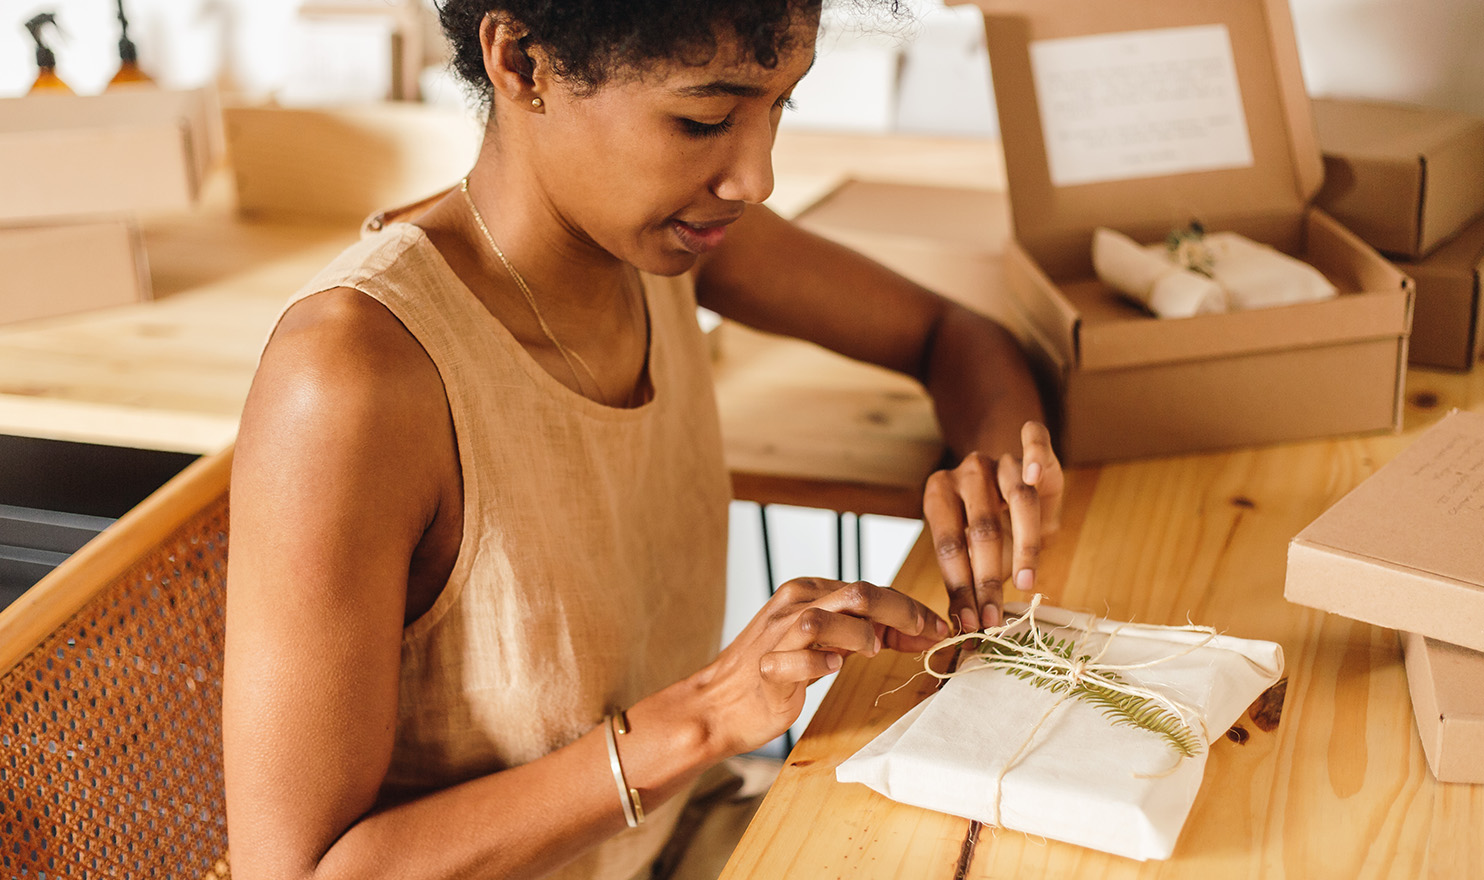 An artisan is carefully packaging an order with little added touches to make it feel special.